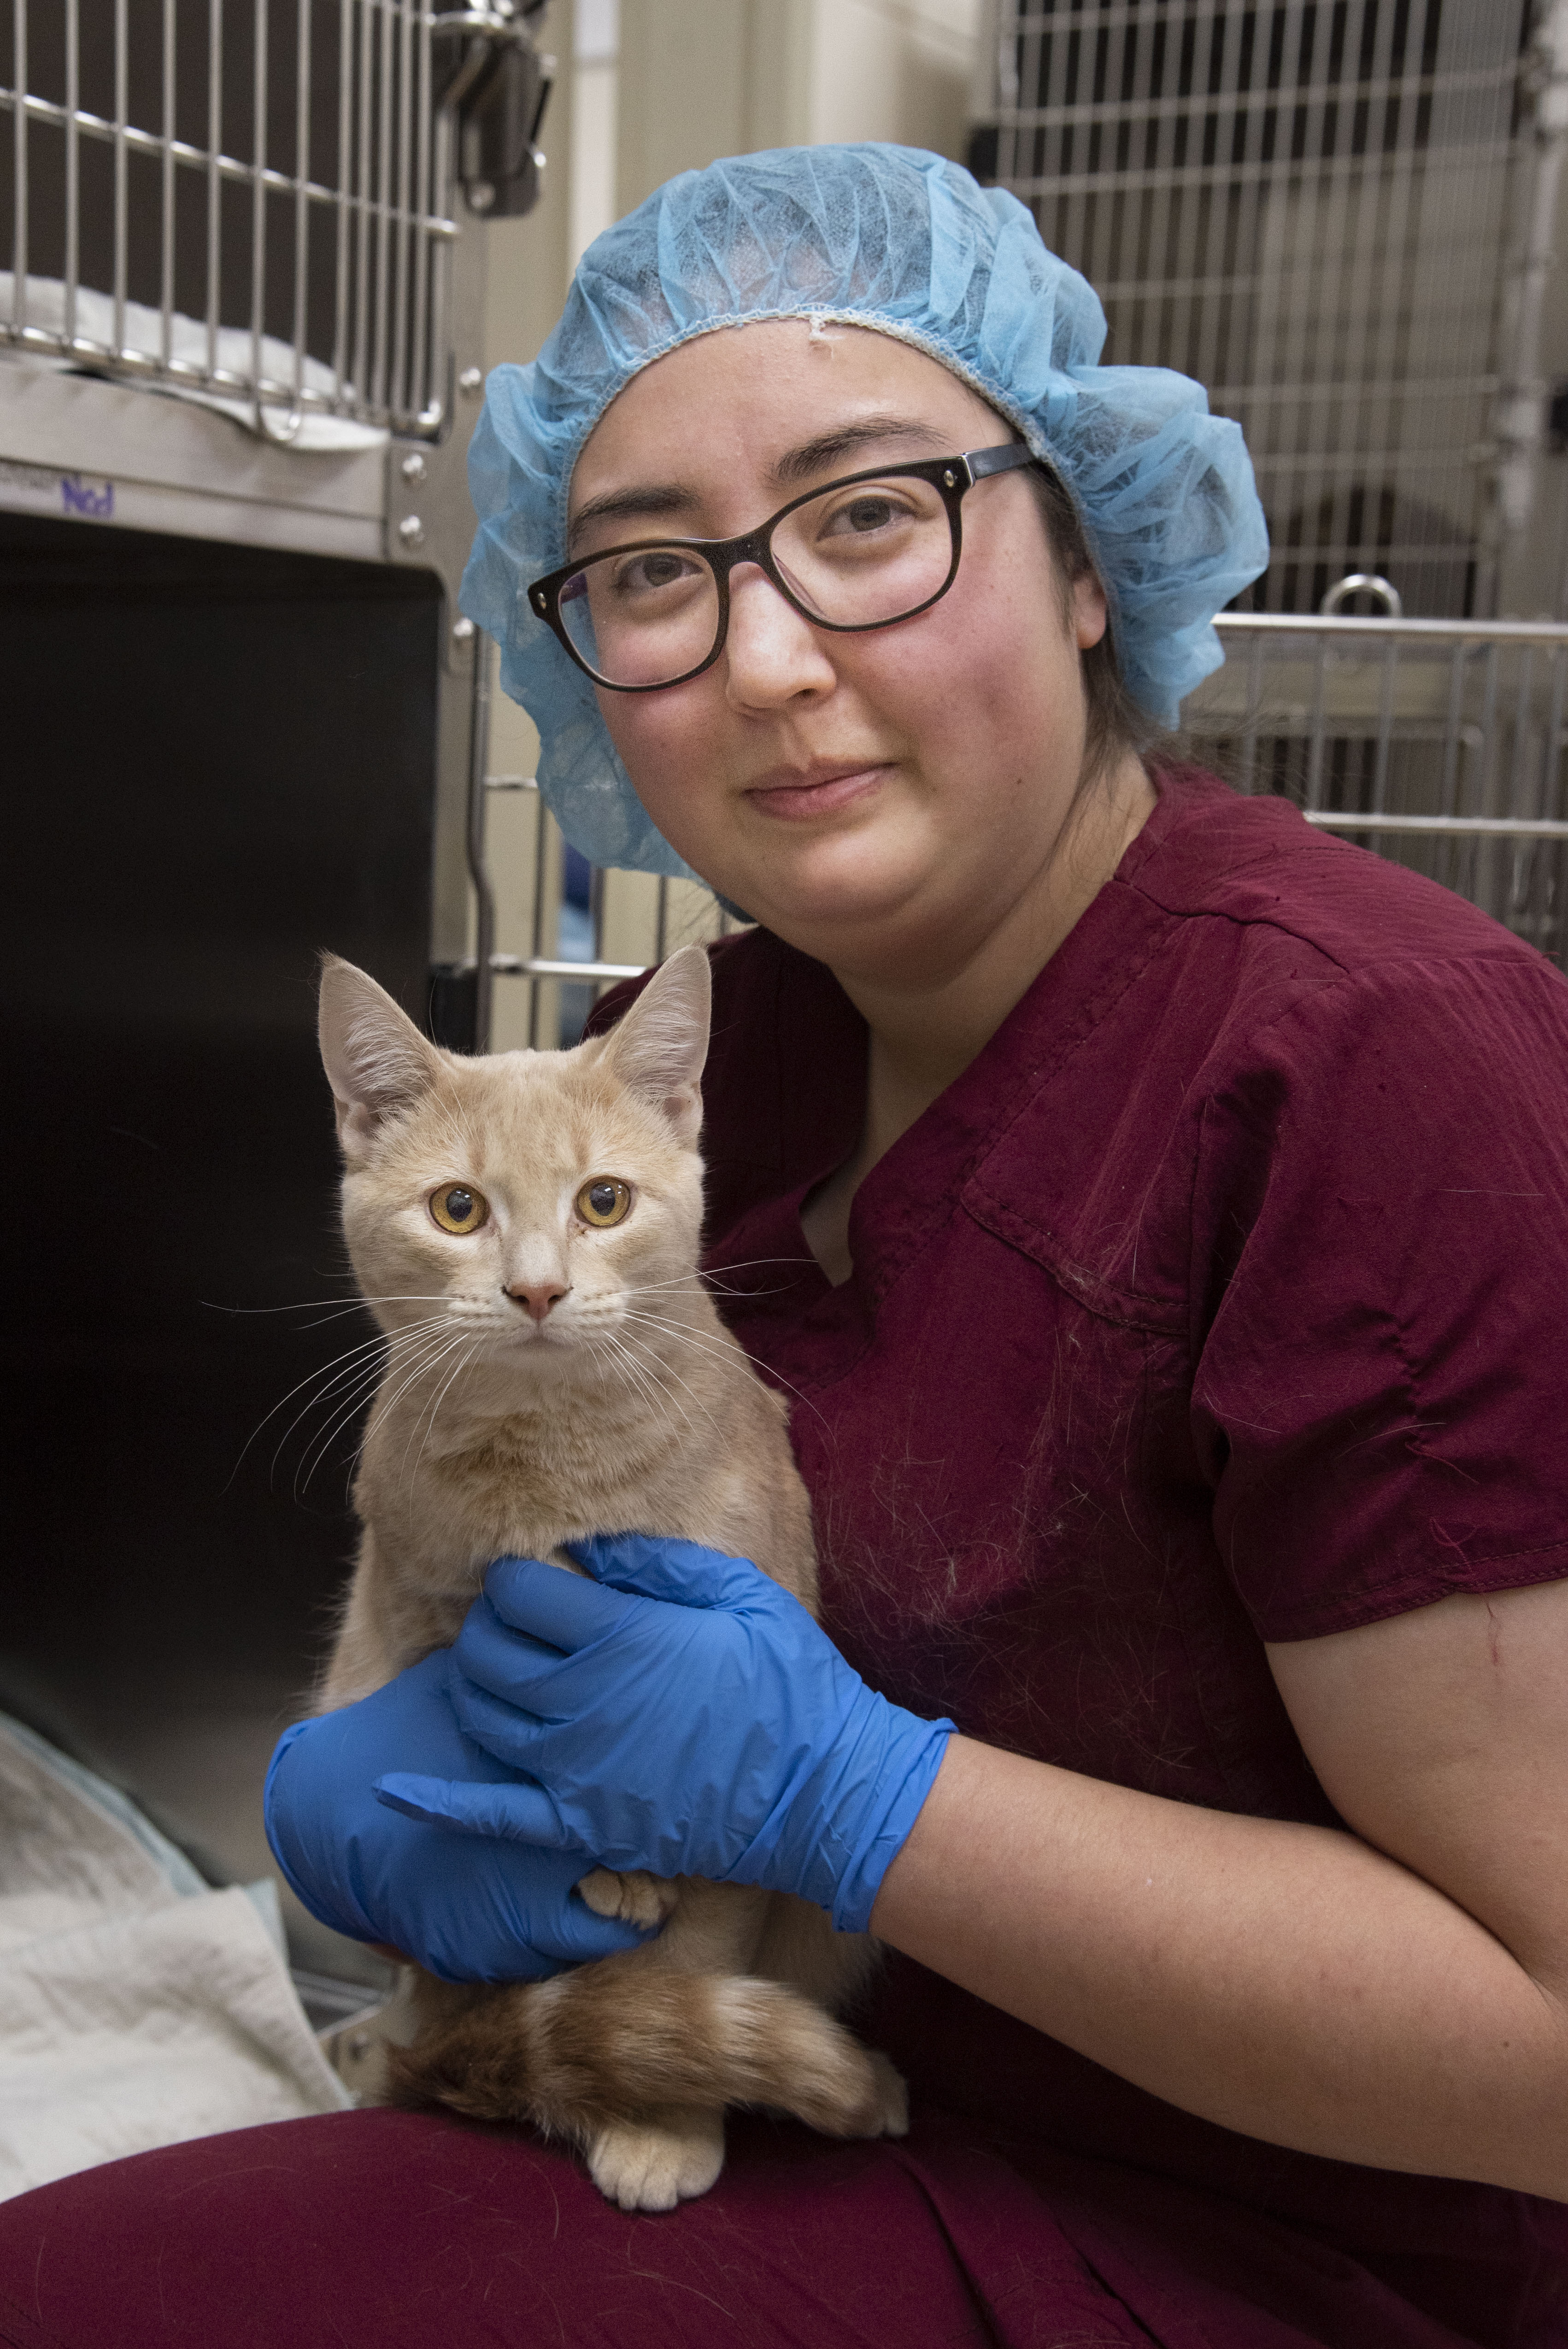 A veterinary student poses with a cat